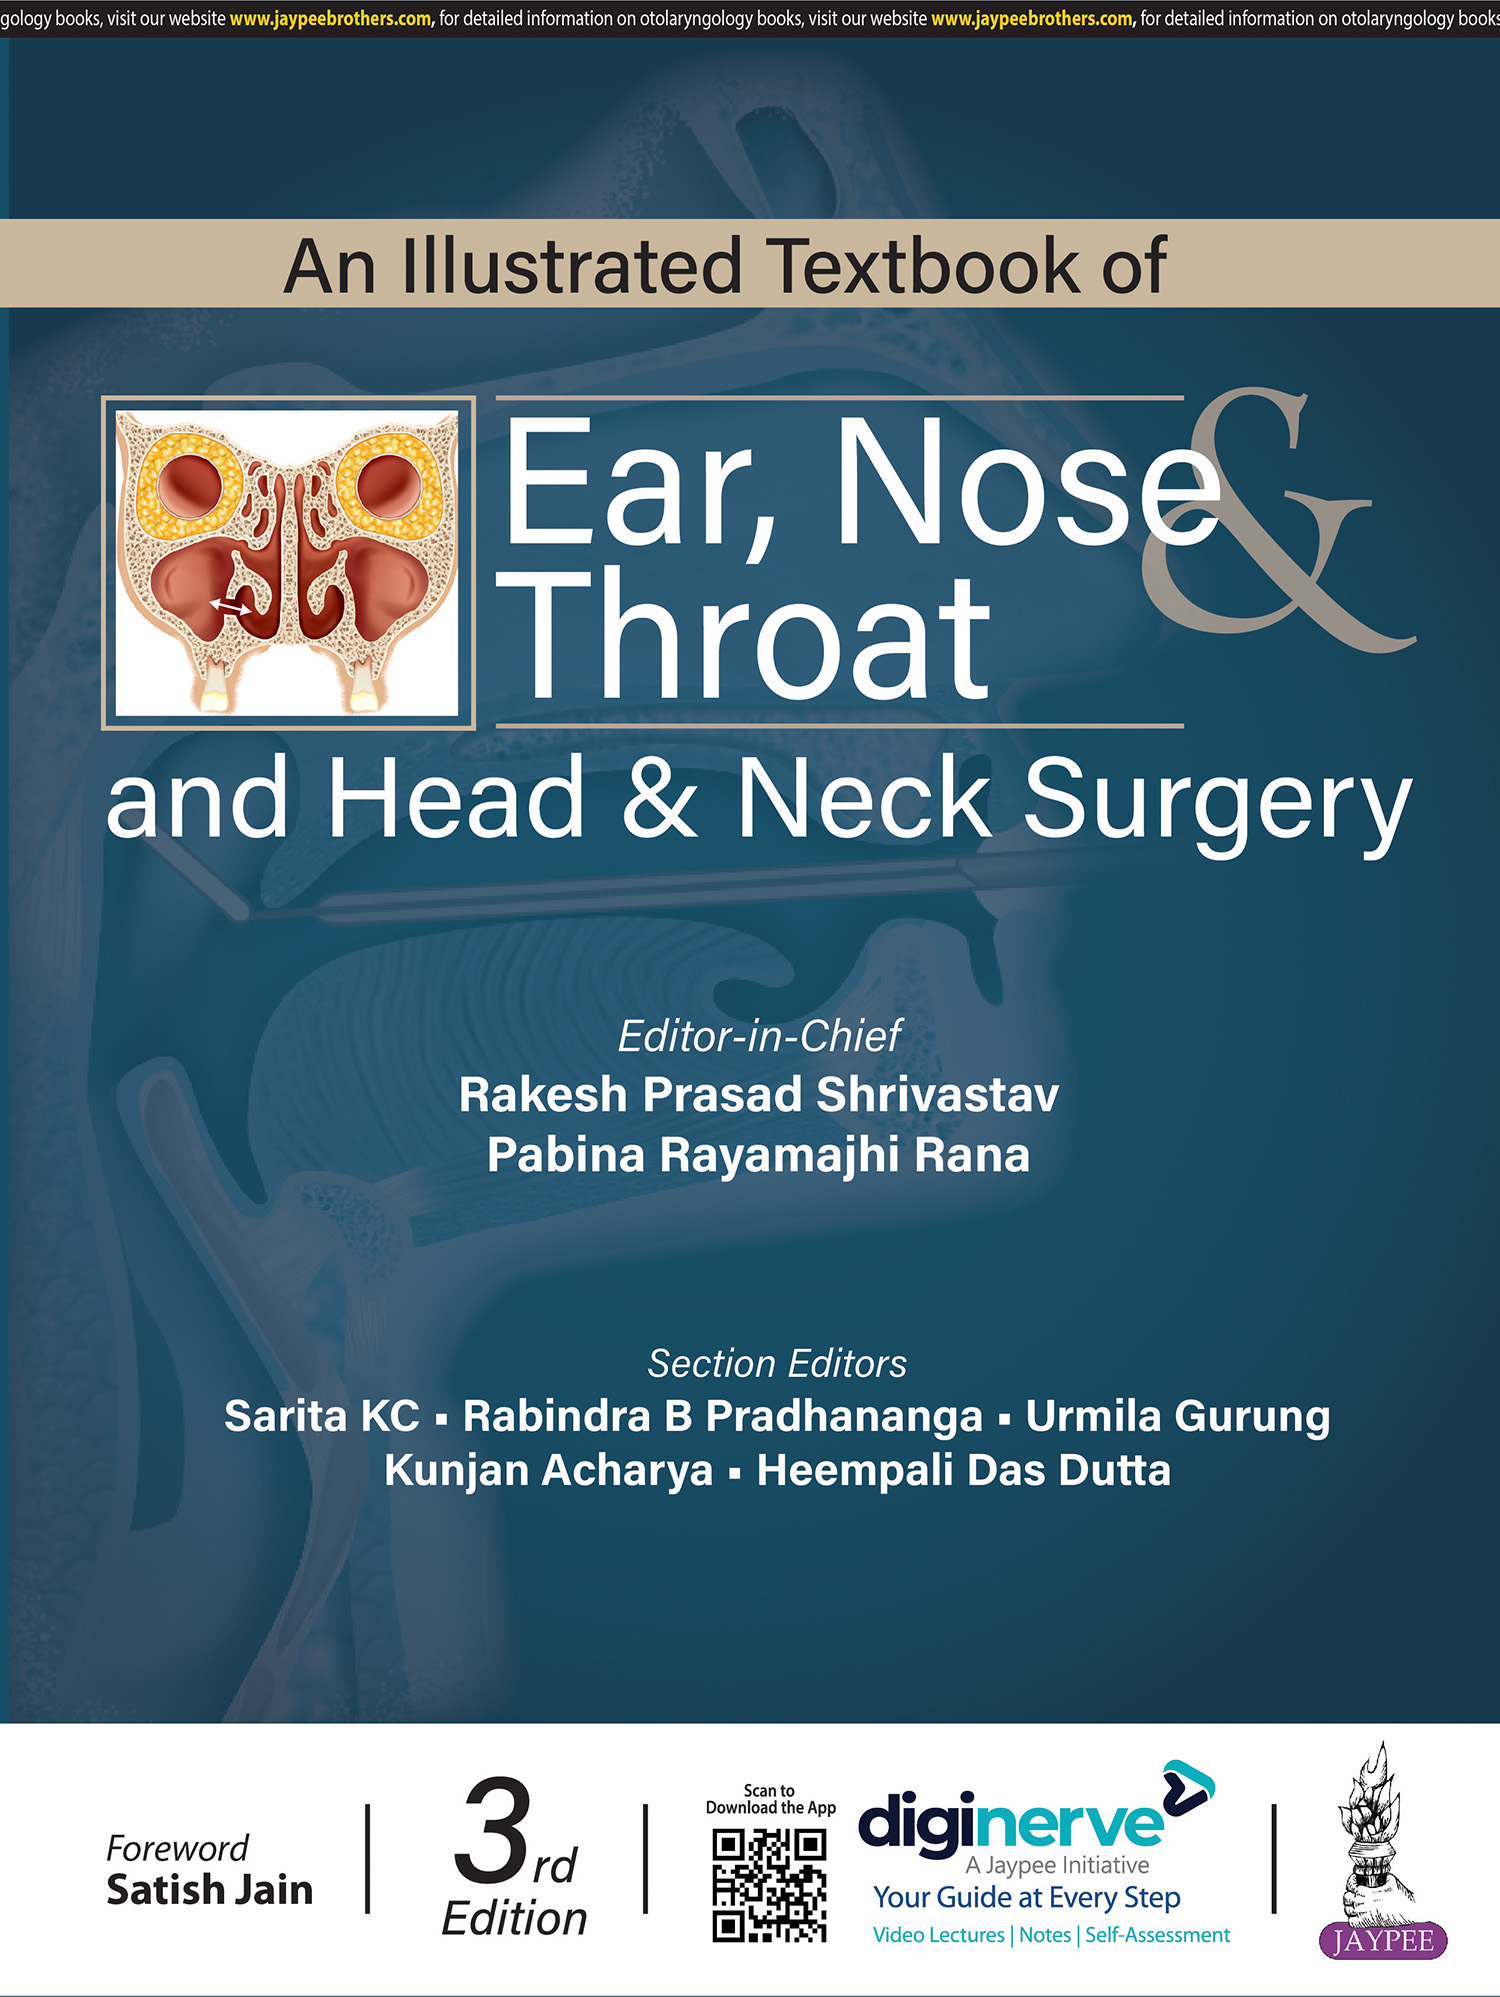 An Illustrated Textbook of Ear, Nose & Throat and Head & Neck Surgery